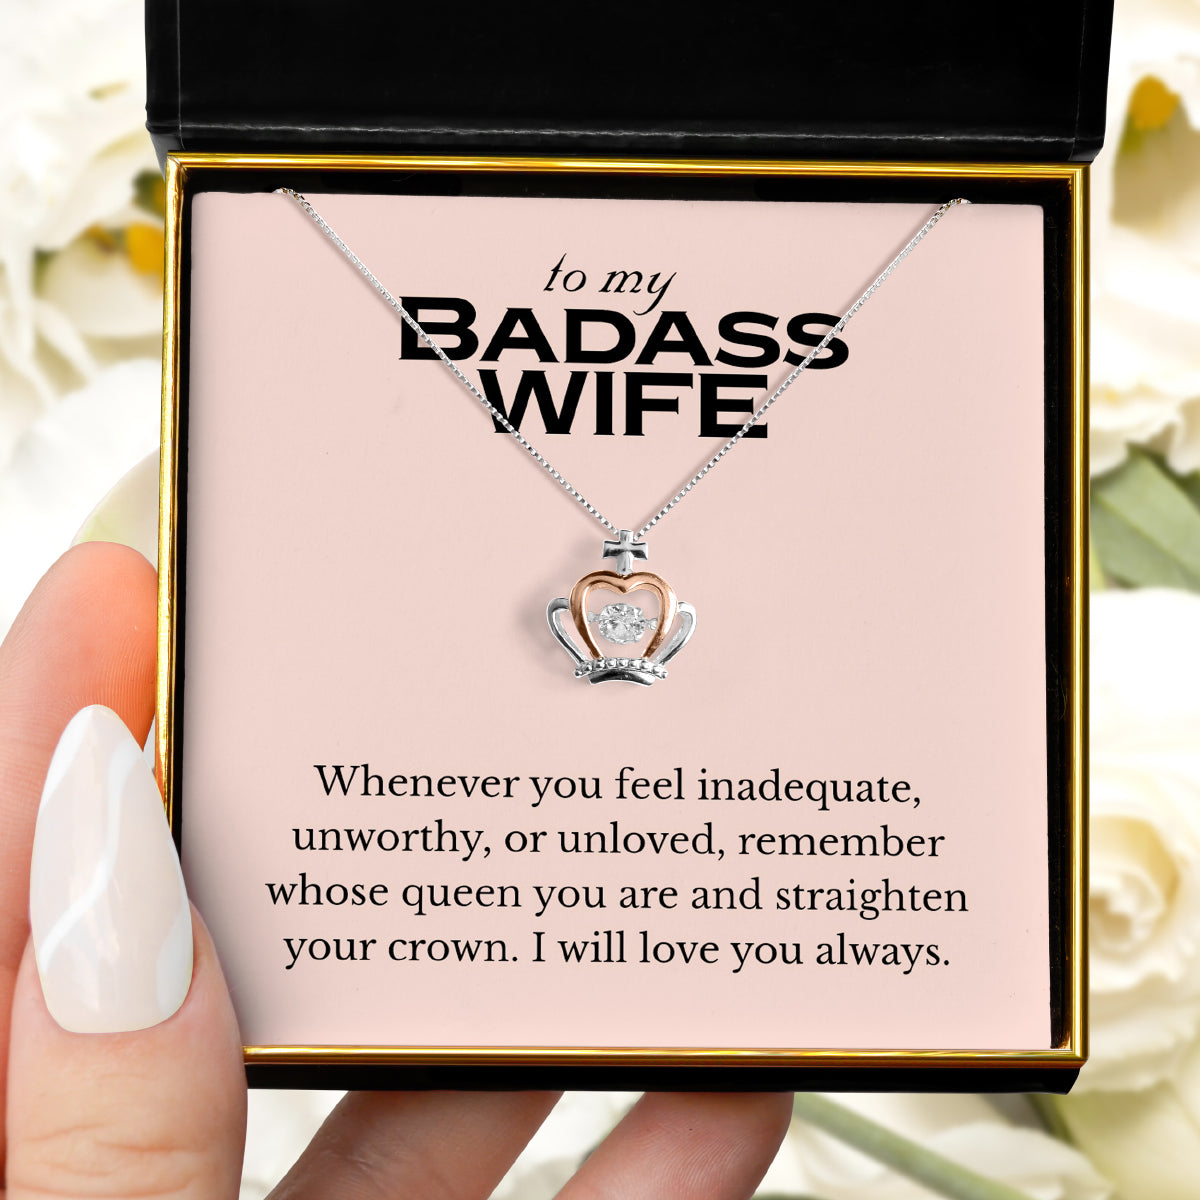 To My Badass Wife (Pink Edition) - Luxe Crown Necklace Gift Set